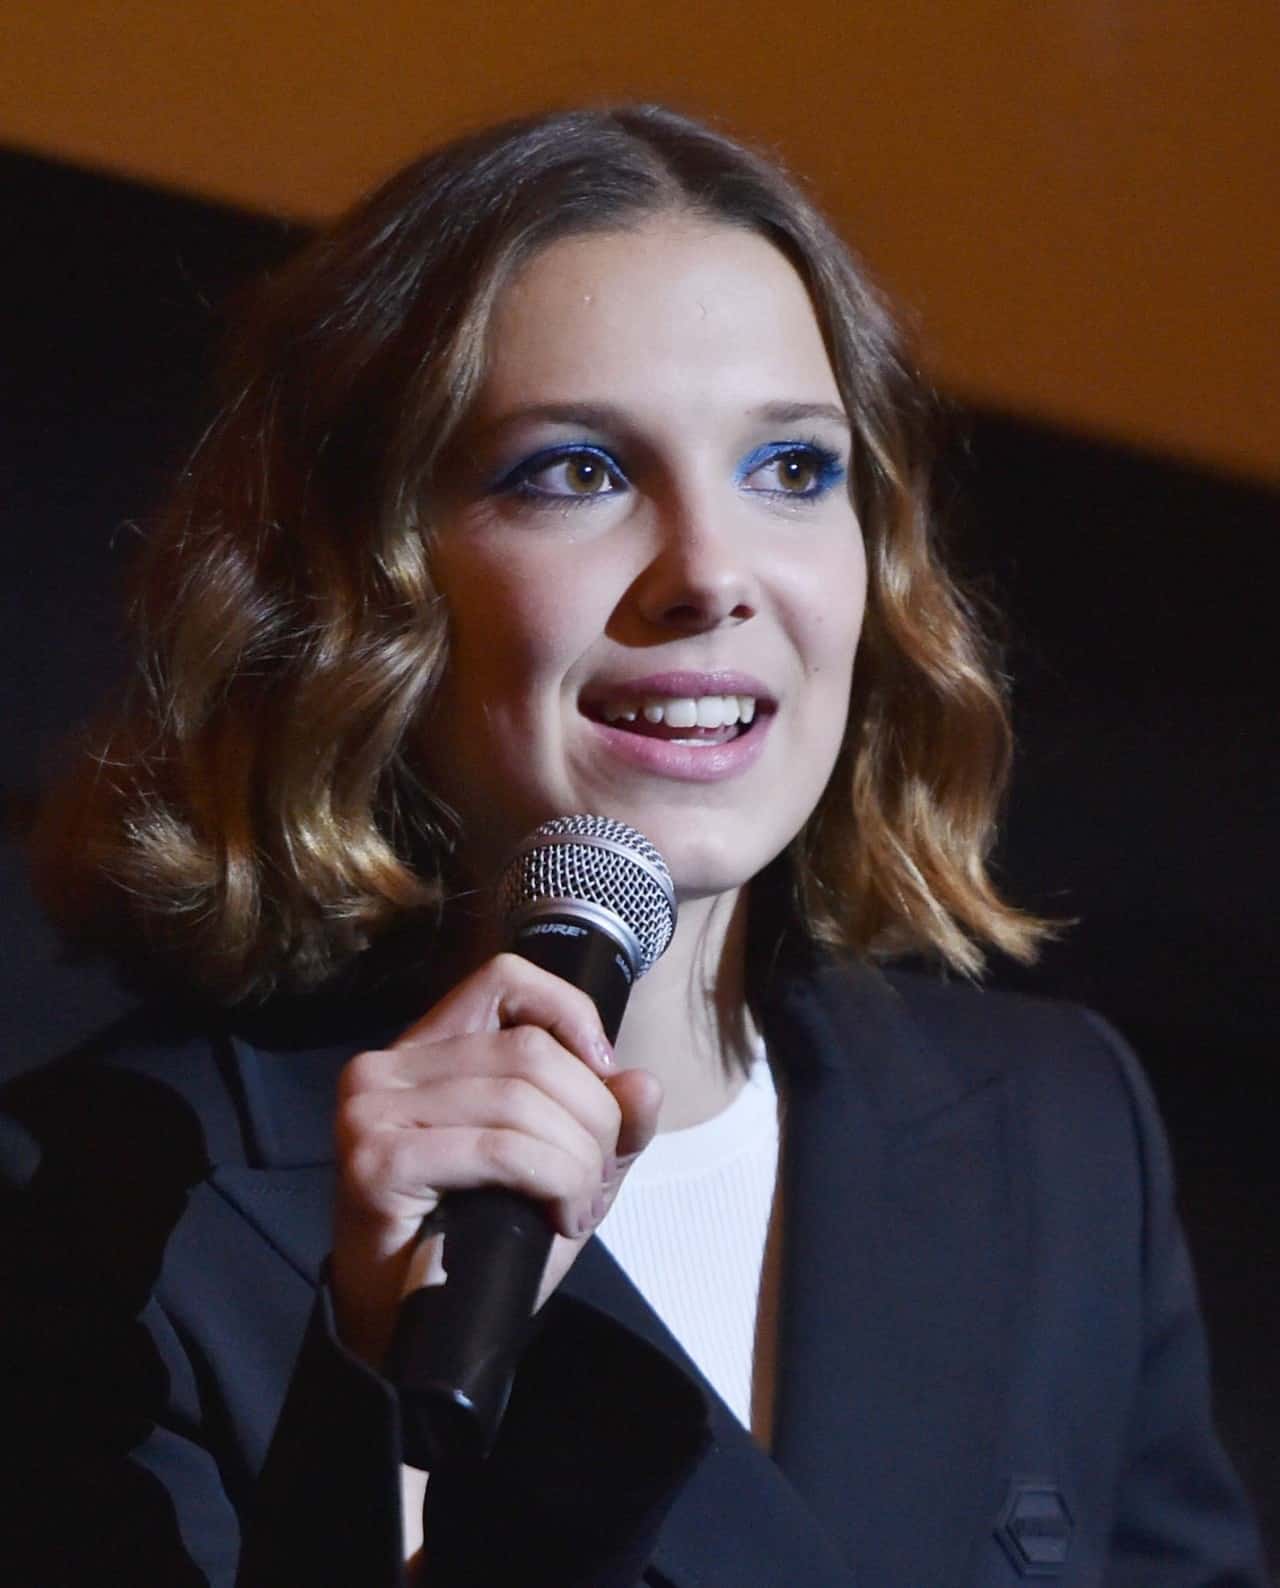 Millie Bobby Brown Wears a Blazer Dress at "Stranger Things" Event